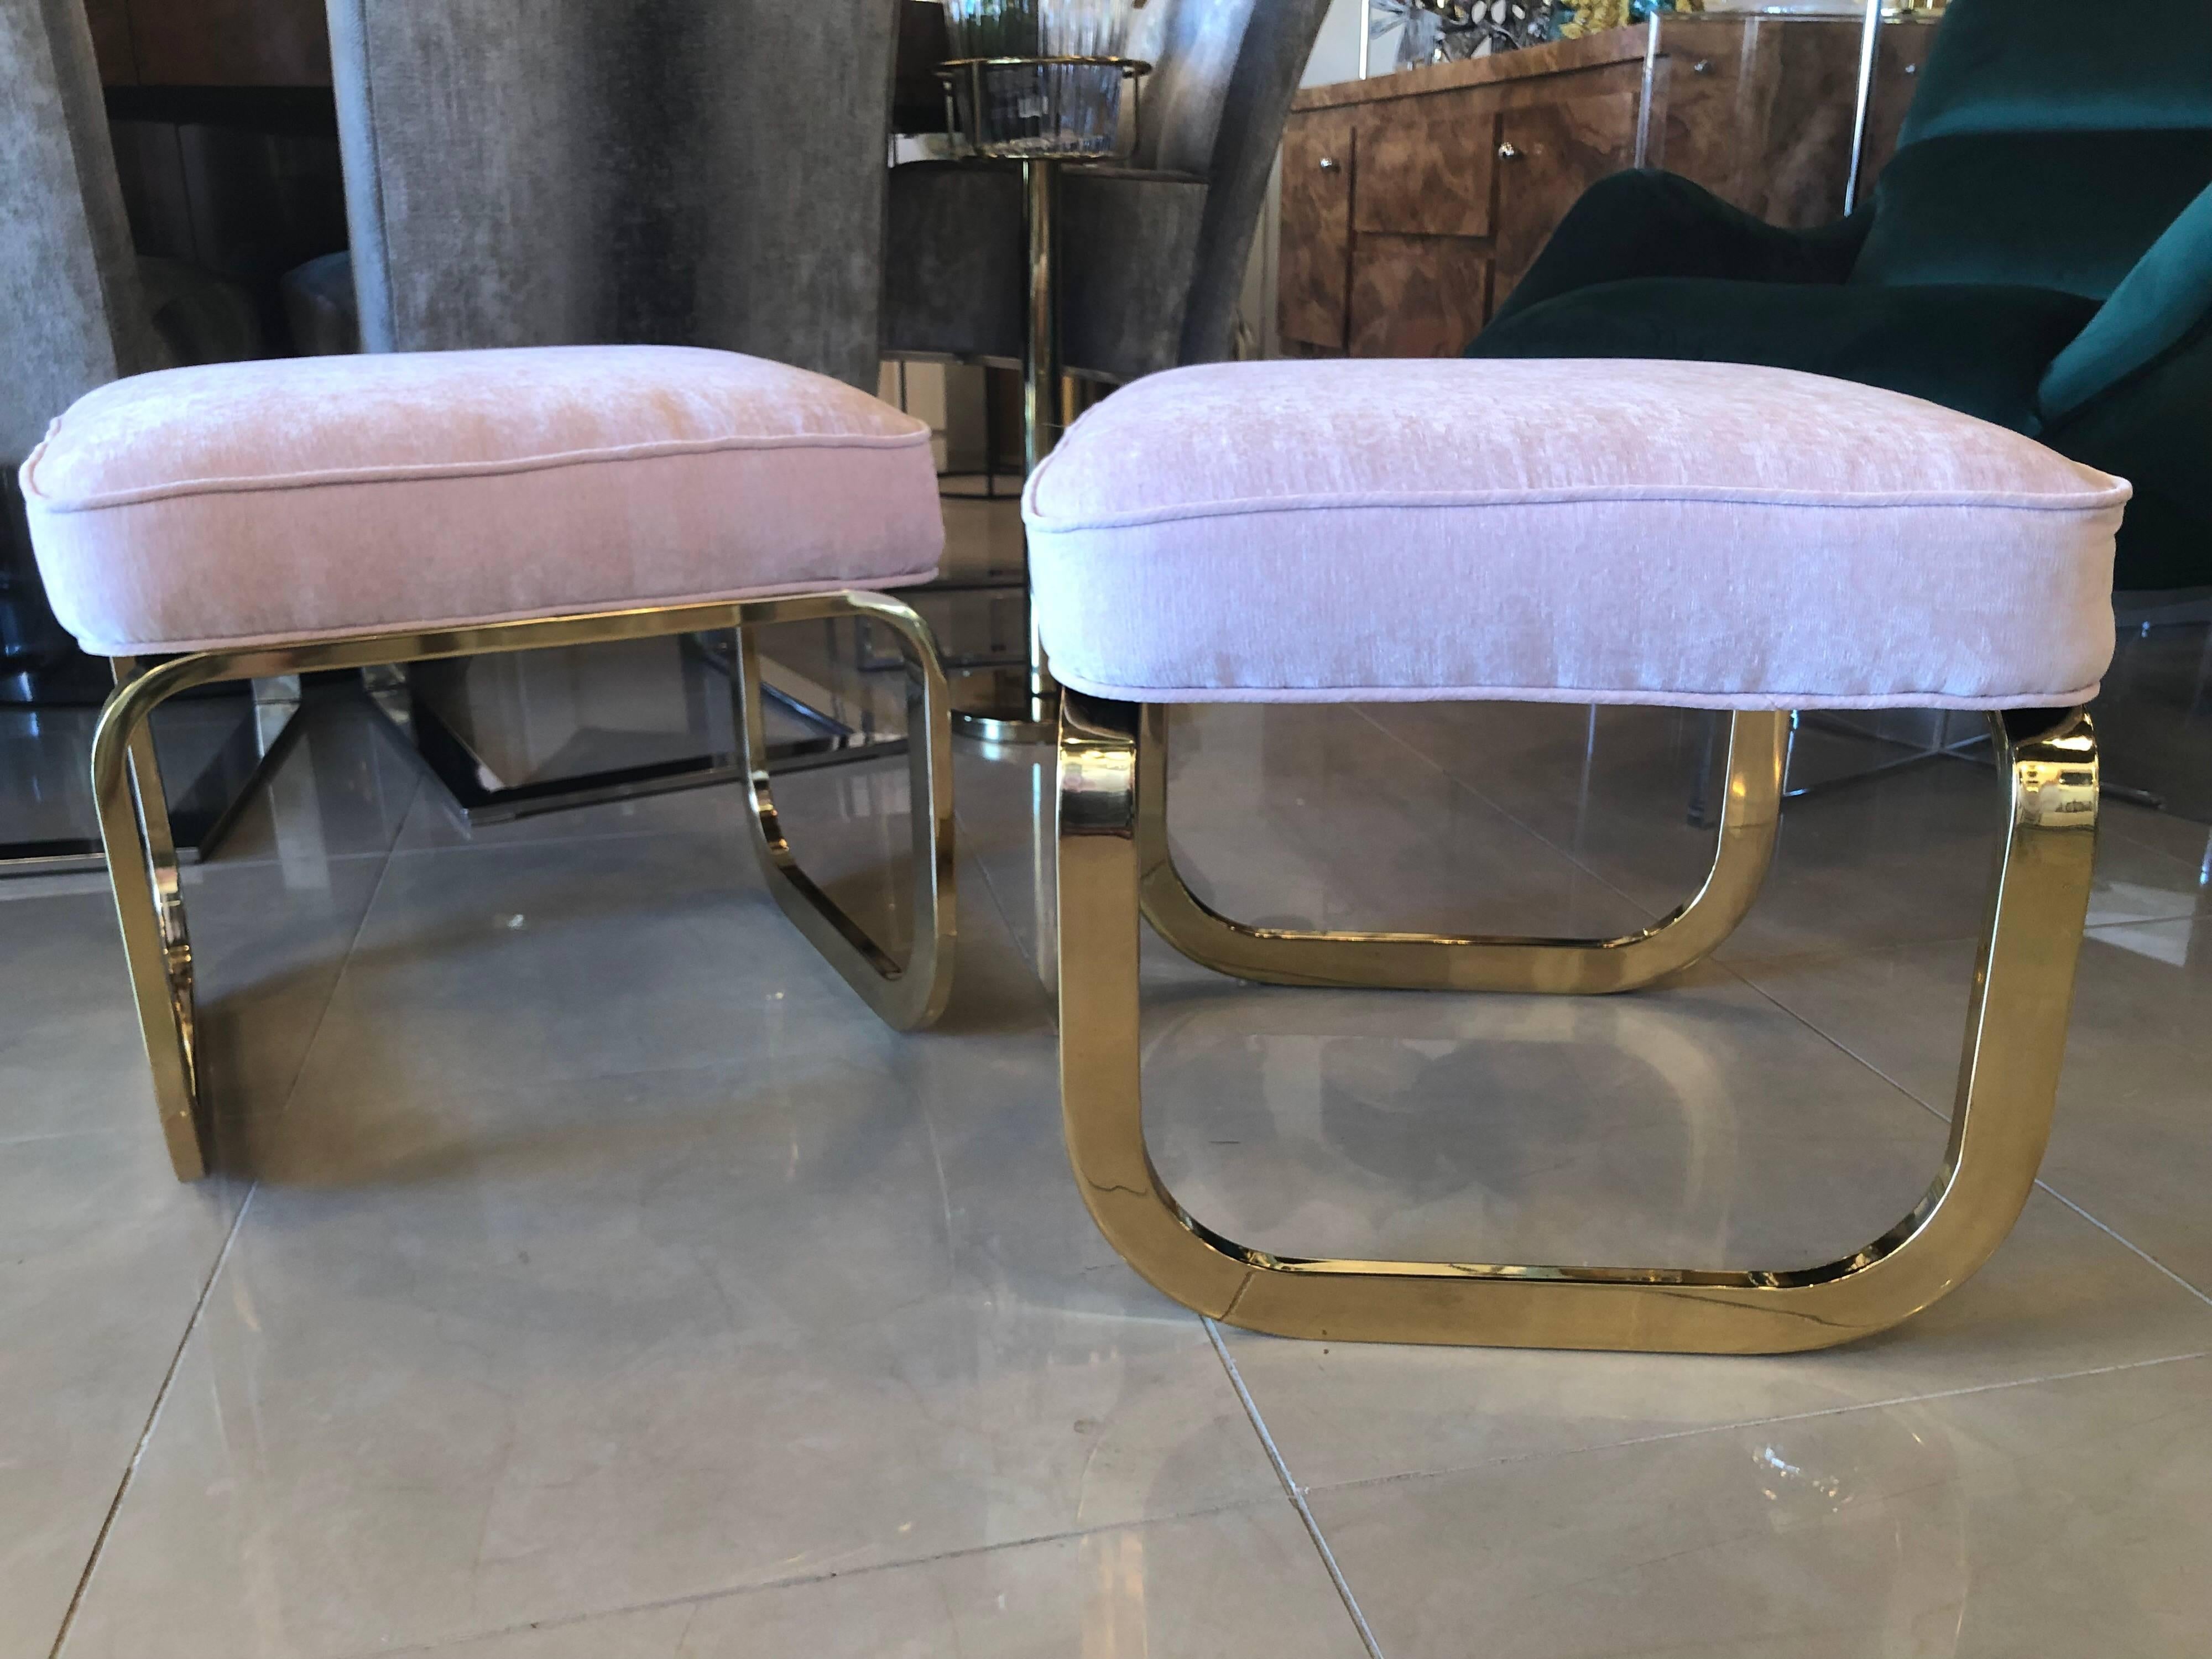 Amazing pair of vintage newly brass-plated stools, benches, ottomans in a newly upholstered pink blush velvet.